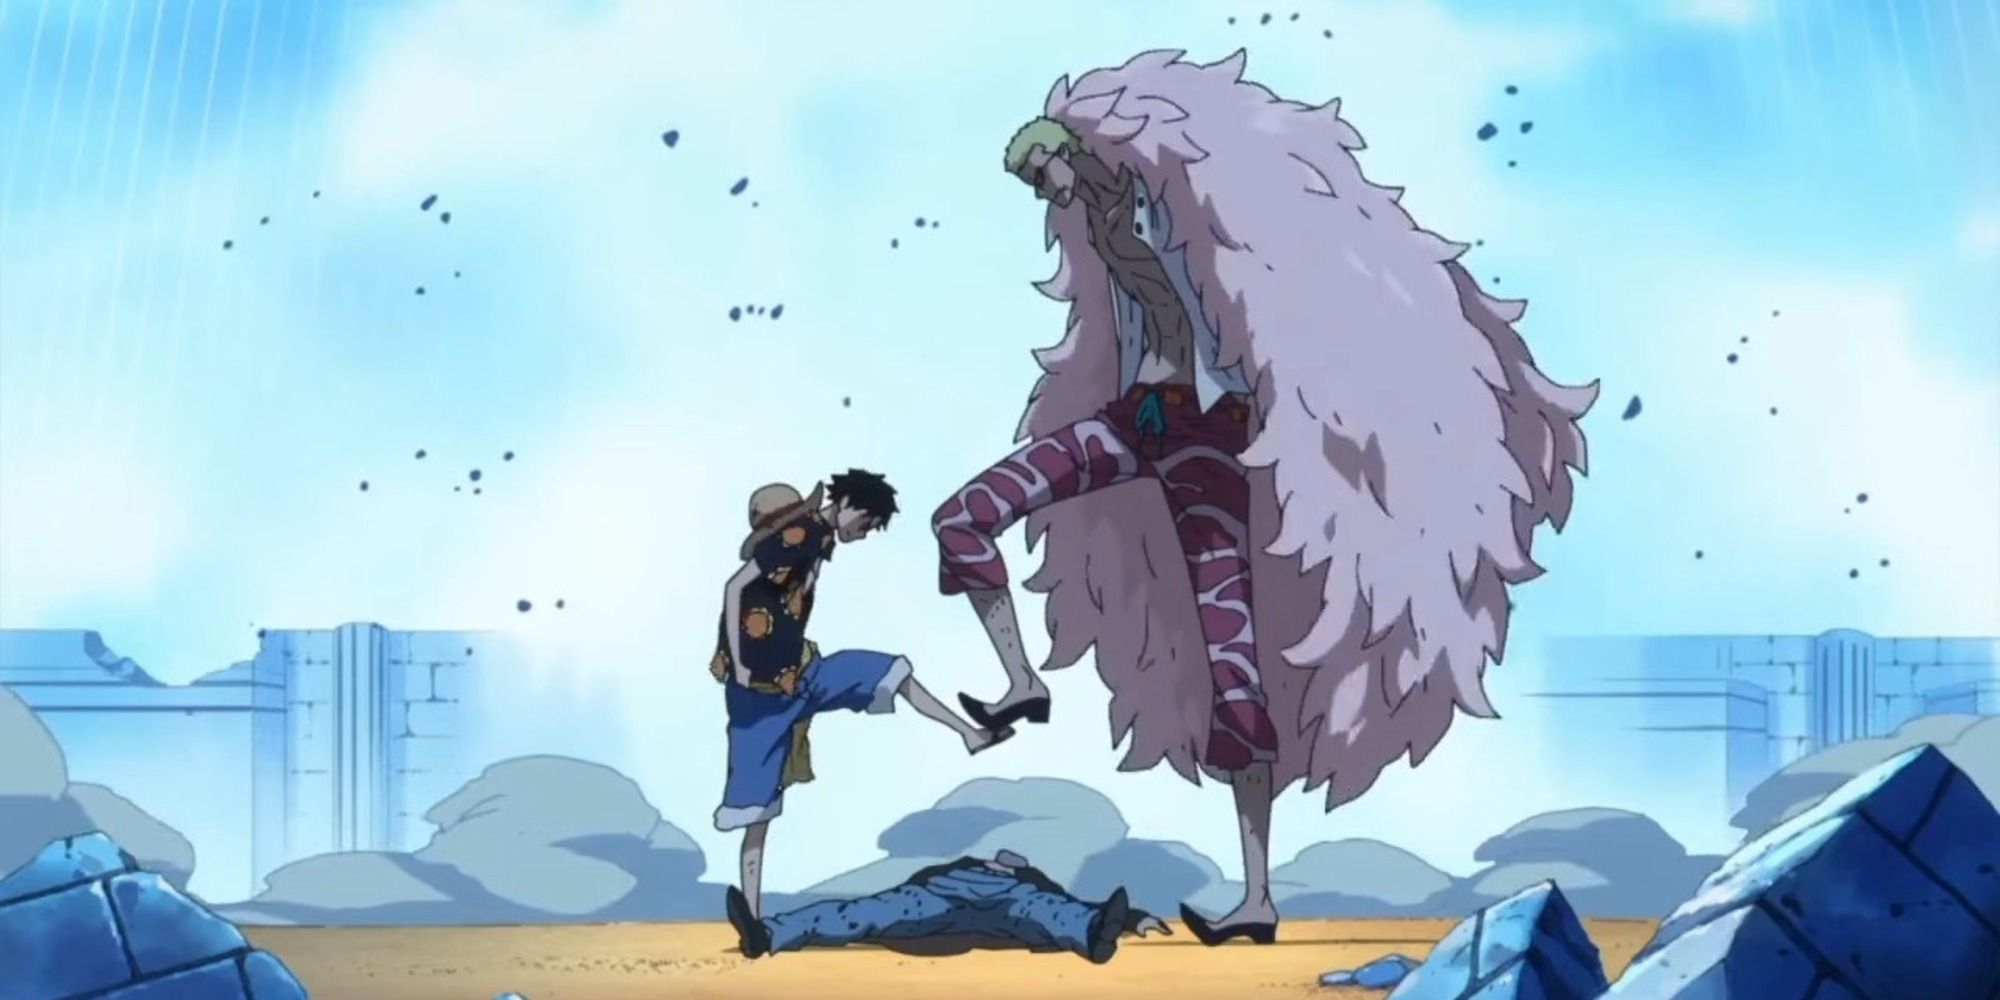 luffy vs doflamingo is one of the best One Piece fights.